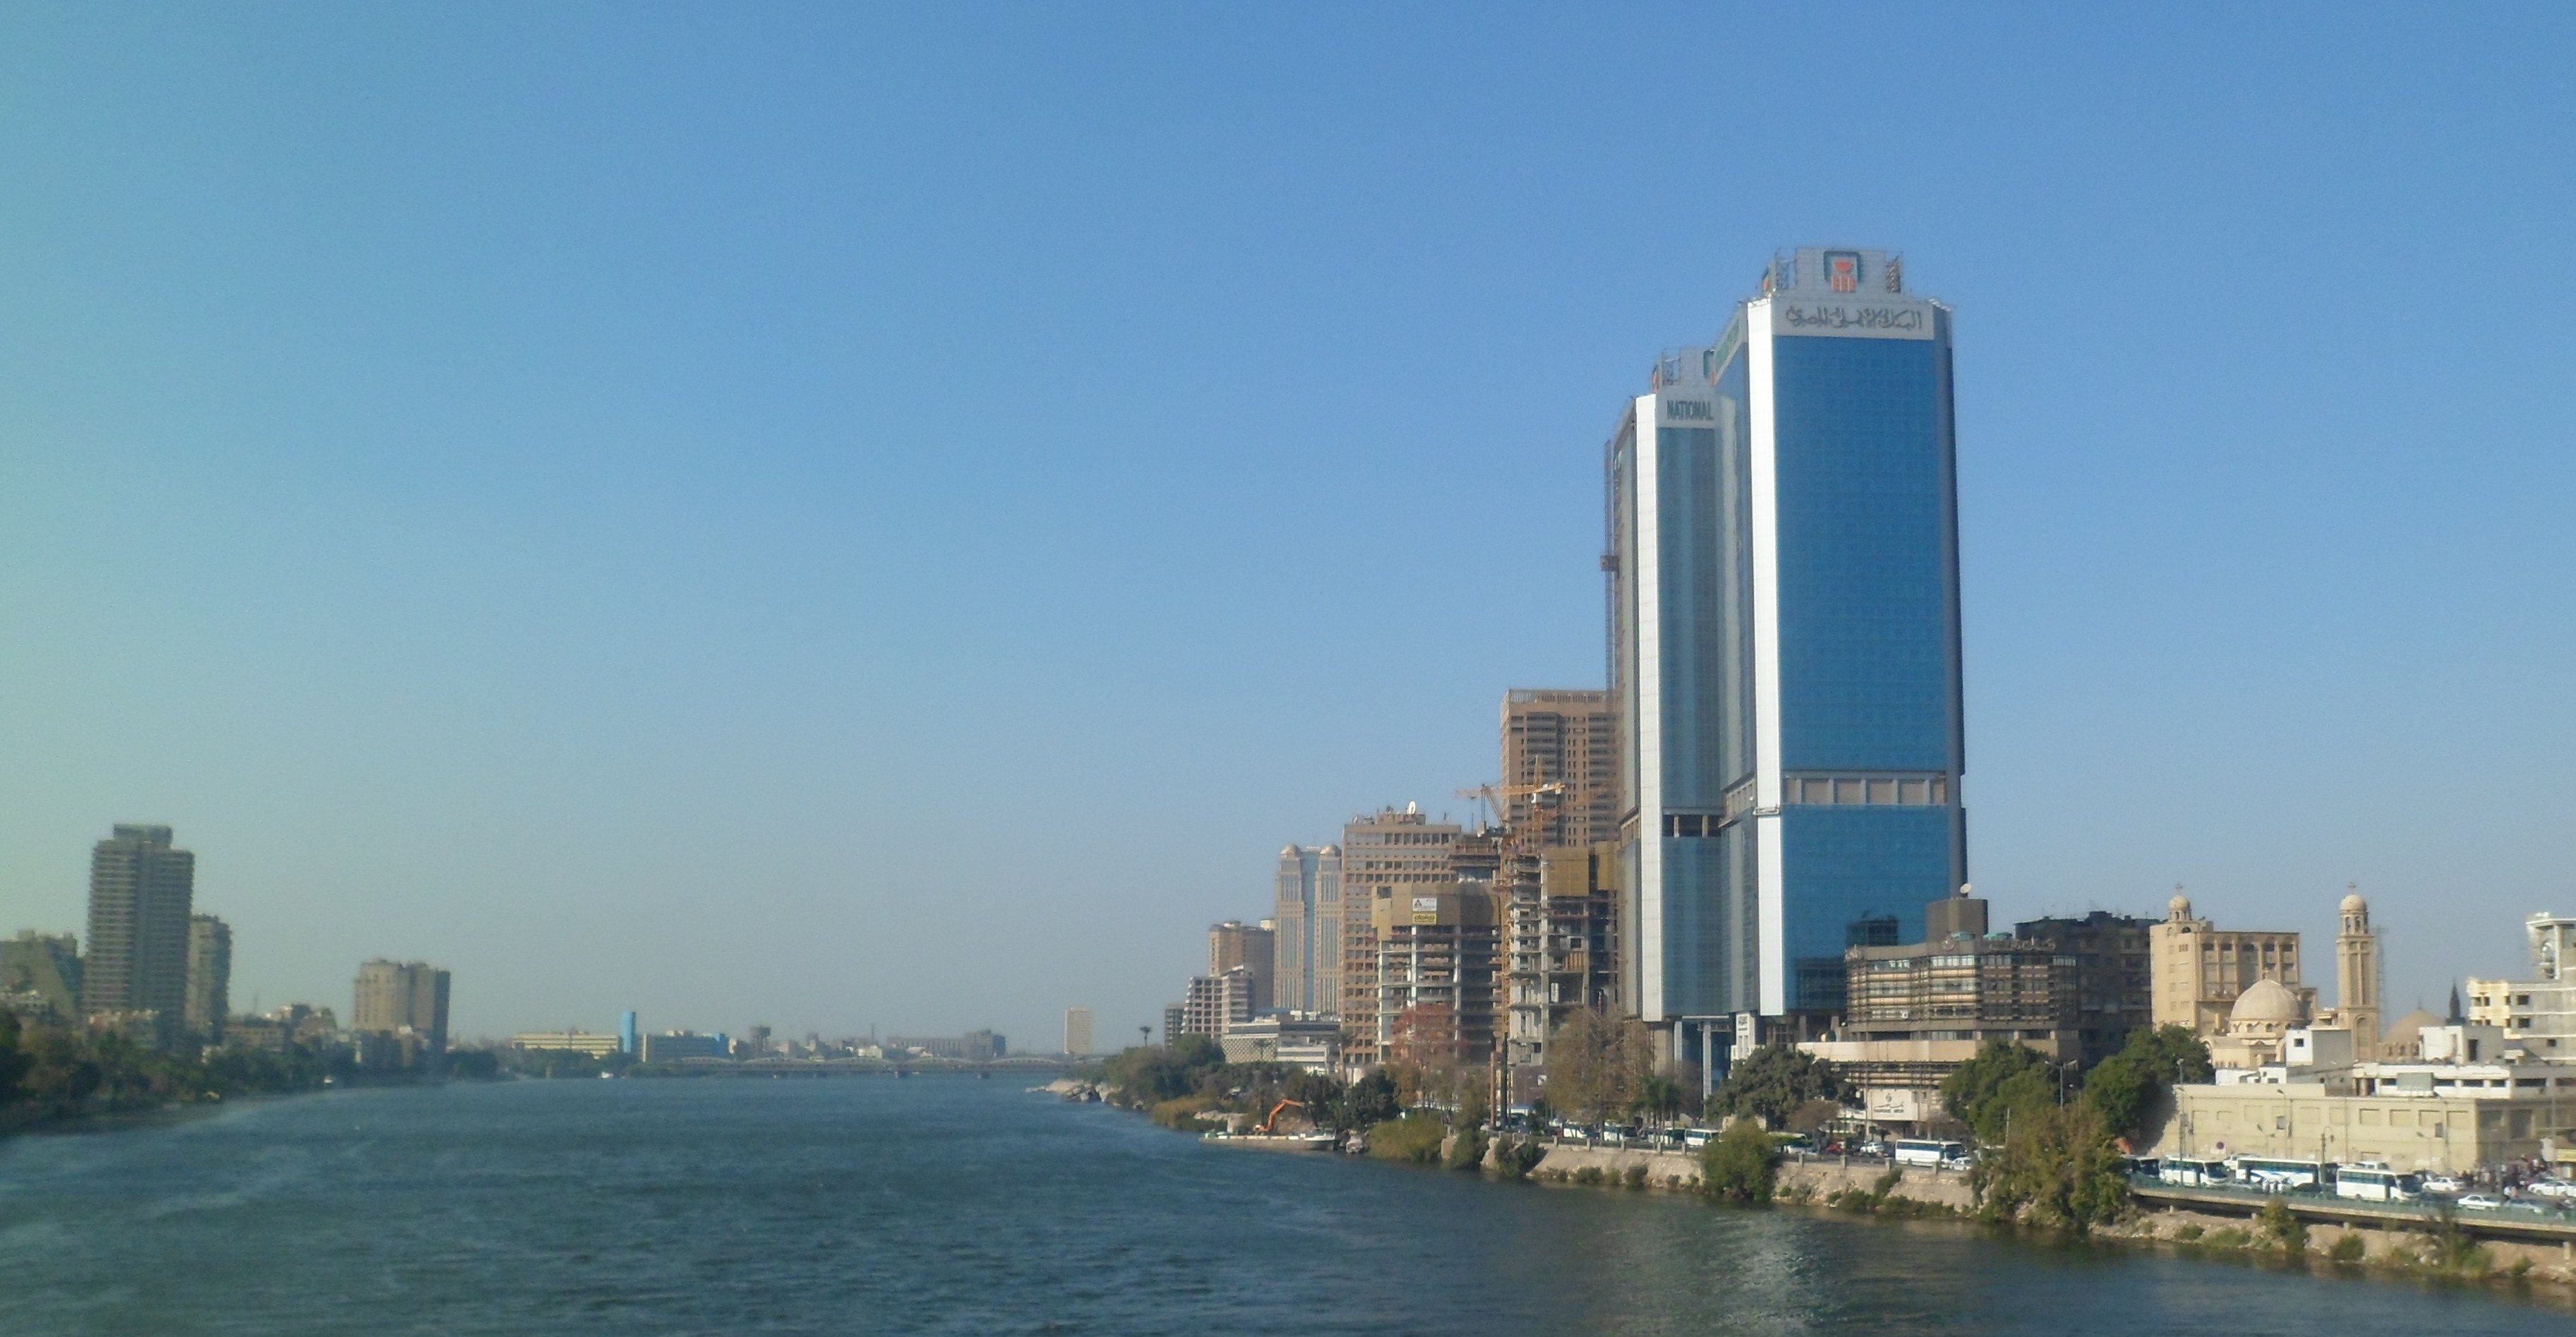 National Bank of Egypt Tower